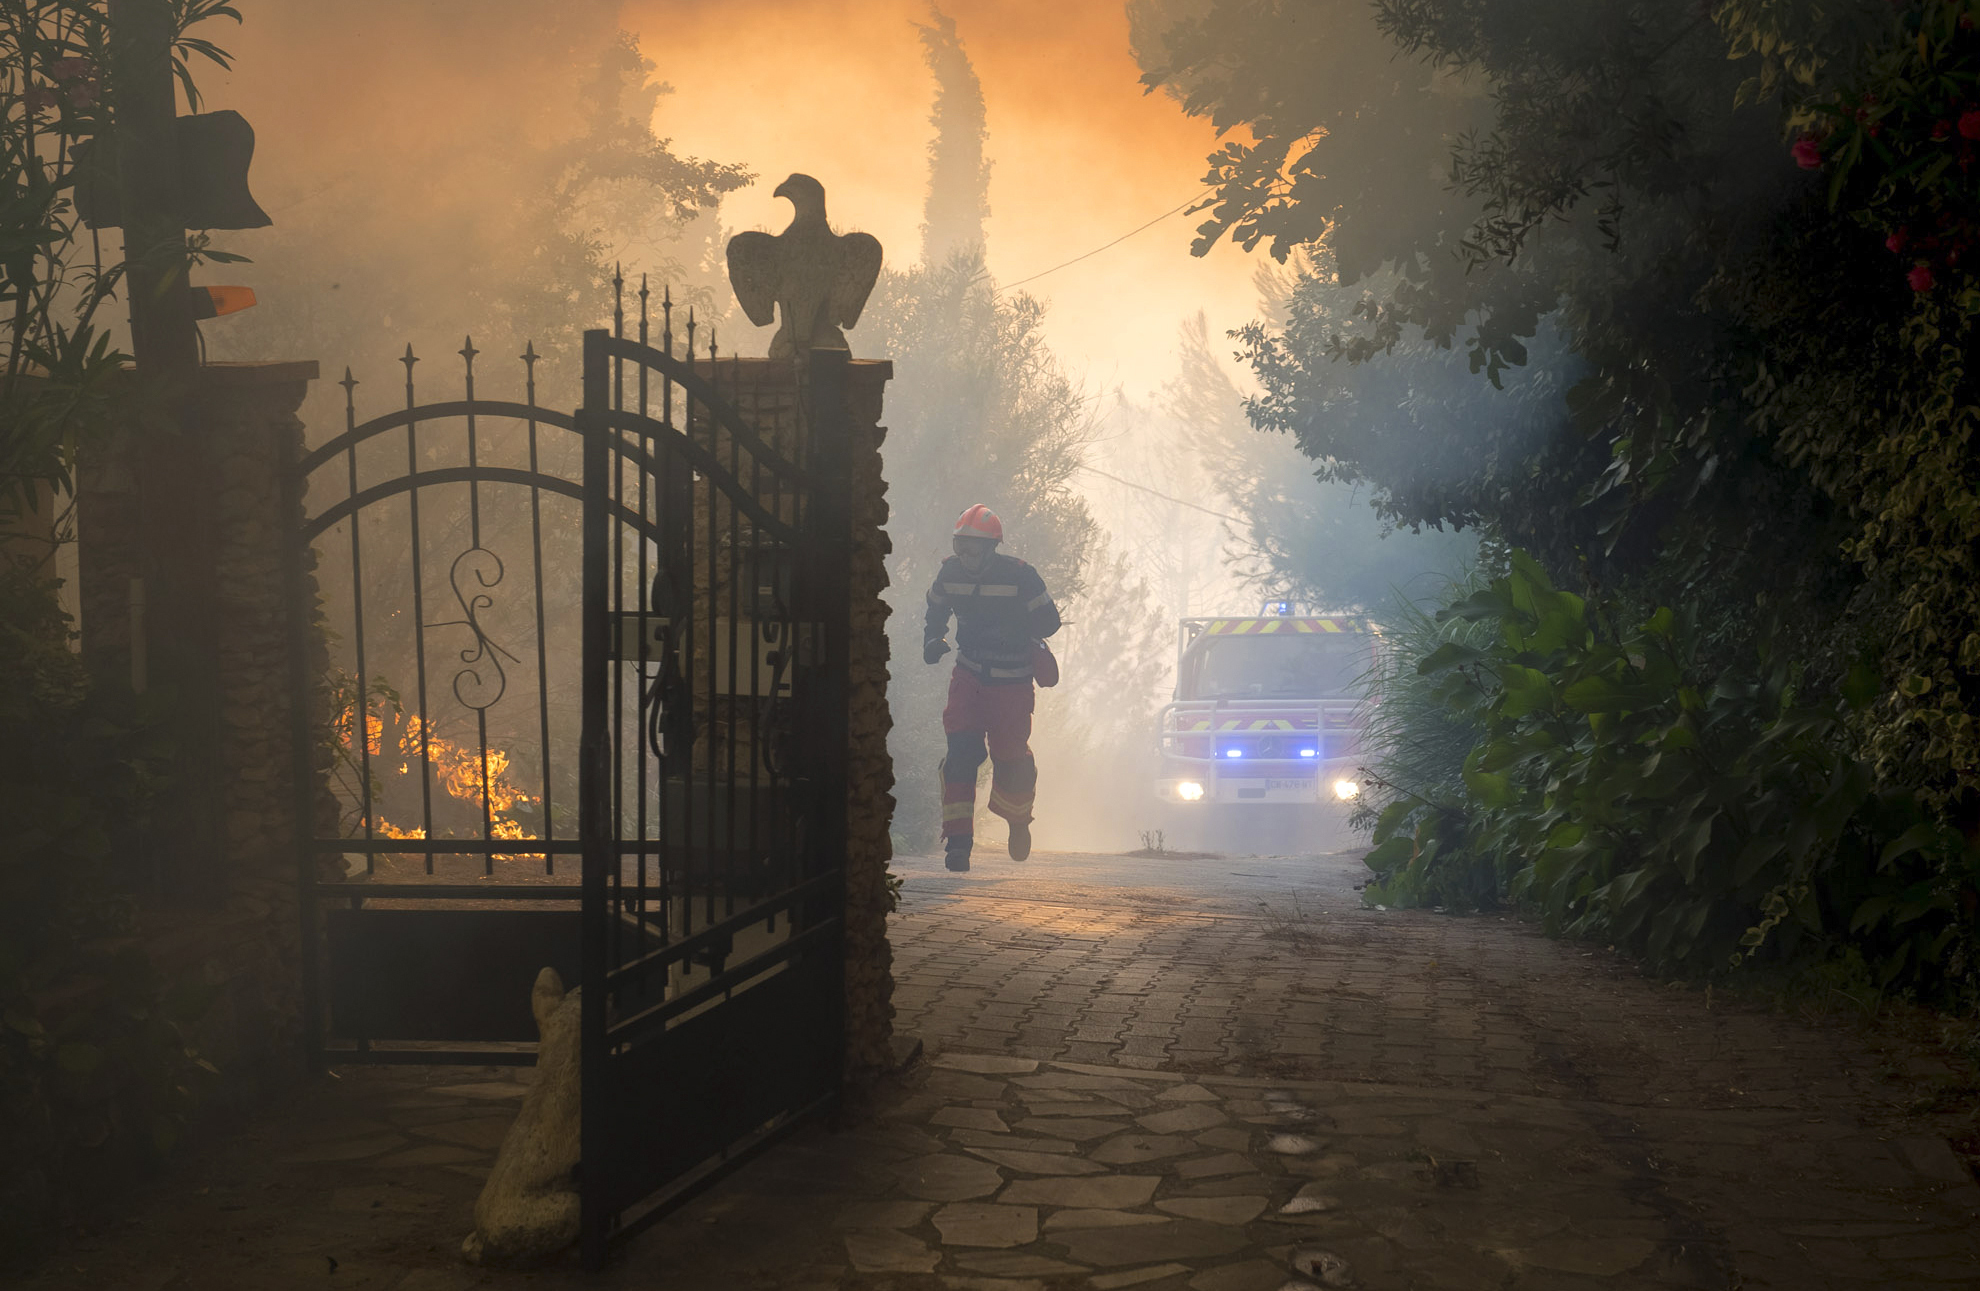 PHOTO: This photo provided by the Bataillon des Pompiers de Marseille (BMPM), shows a firefighter running past a fire near Marseille, Southern France, Aug.10, 2016.